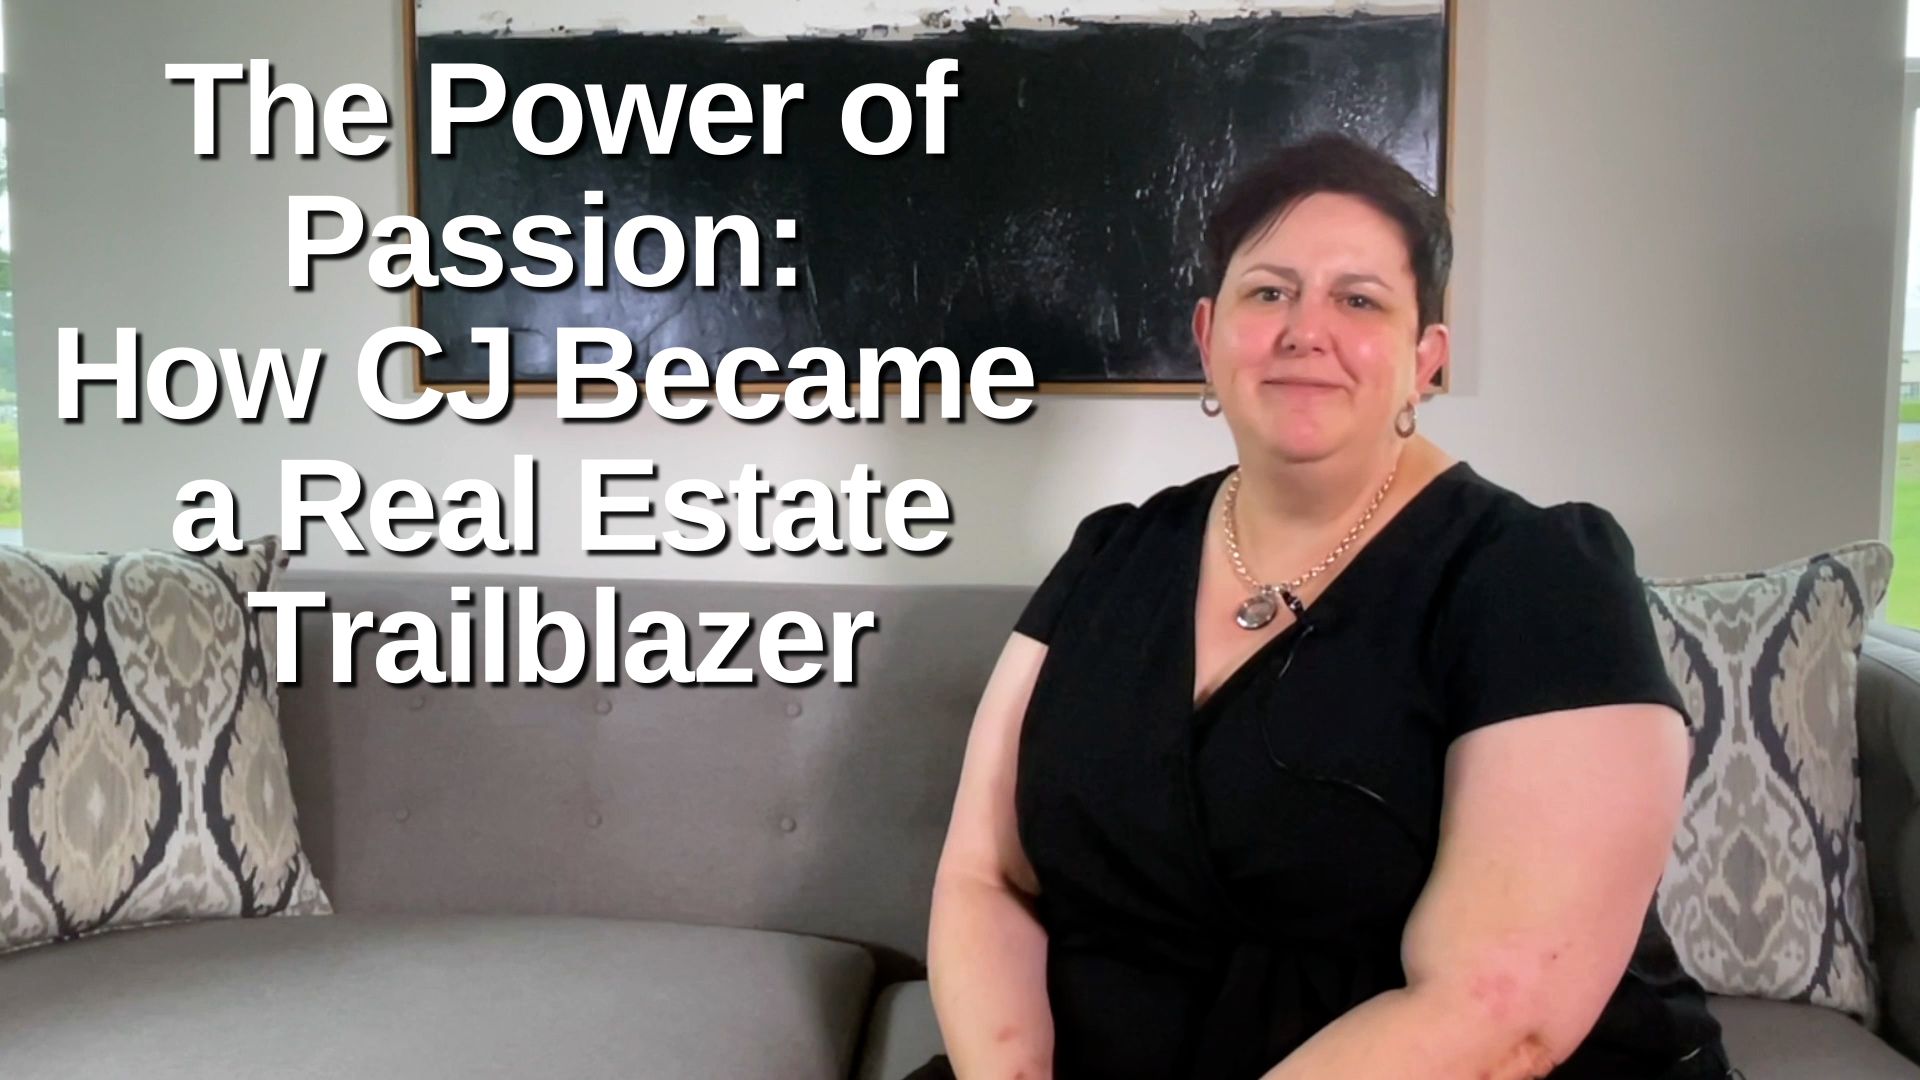 From Chance Encounter To Dream Career: CJ’s Triumph in Real Estate